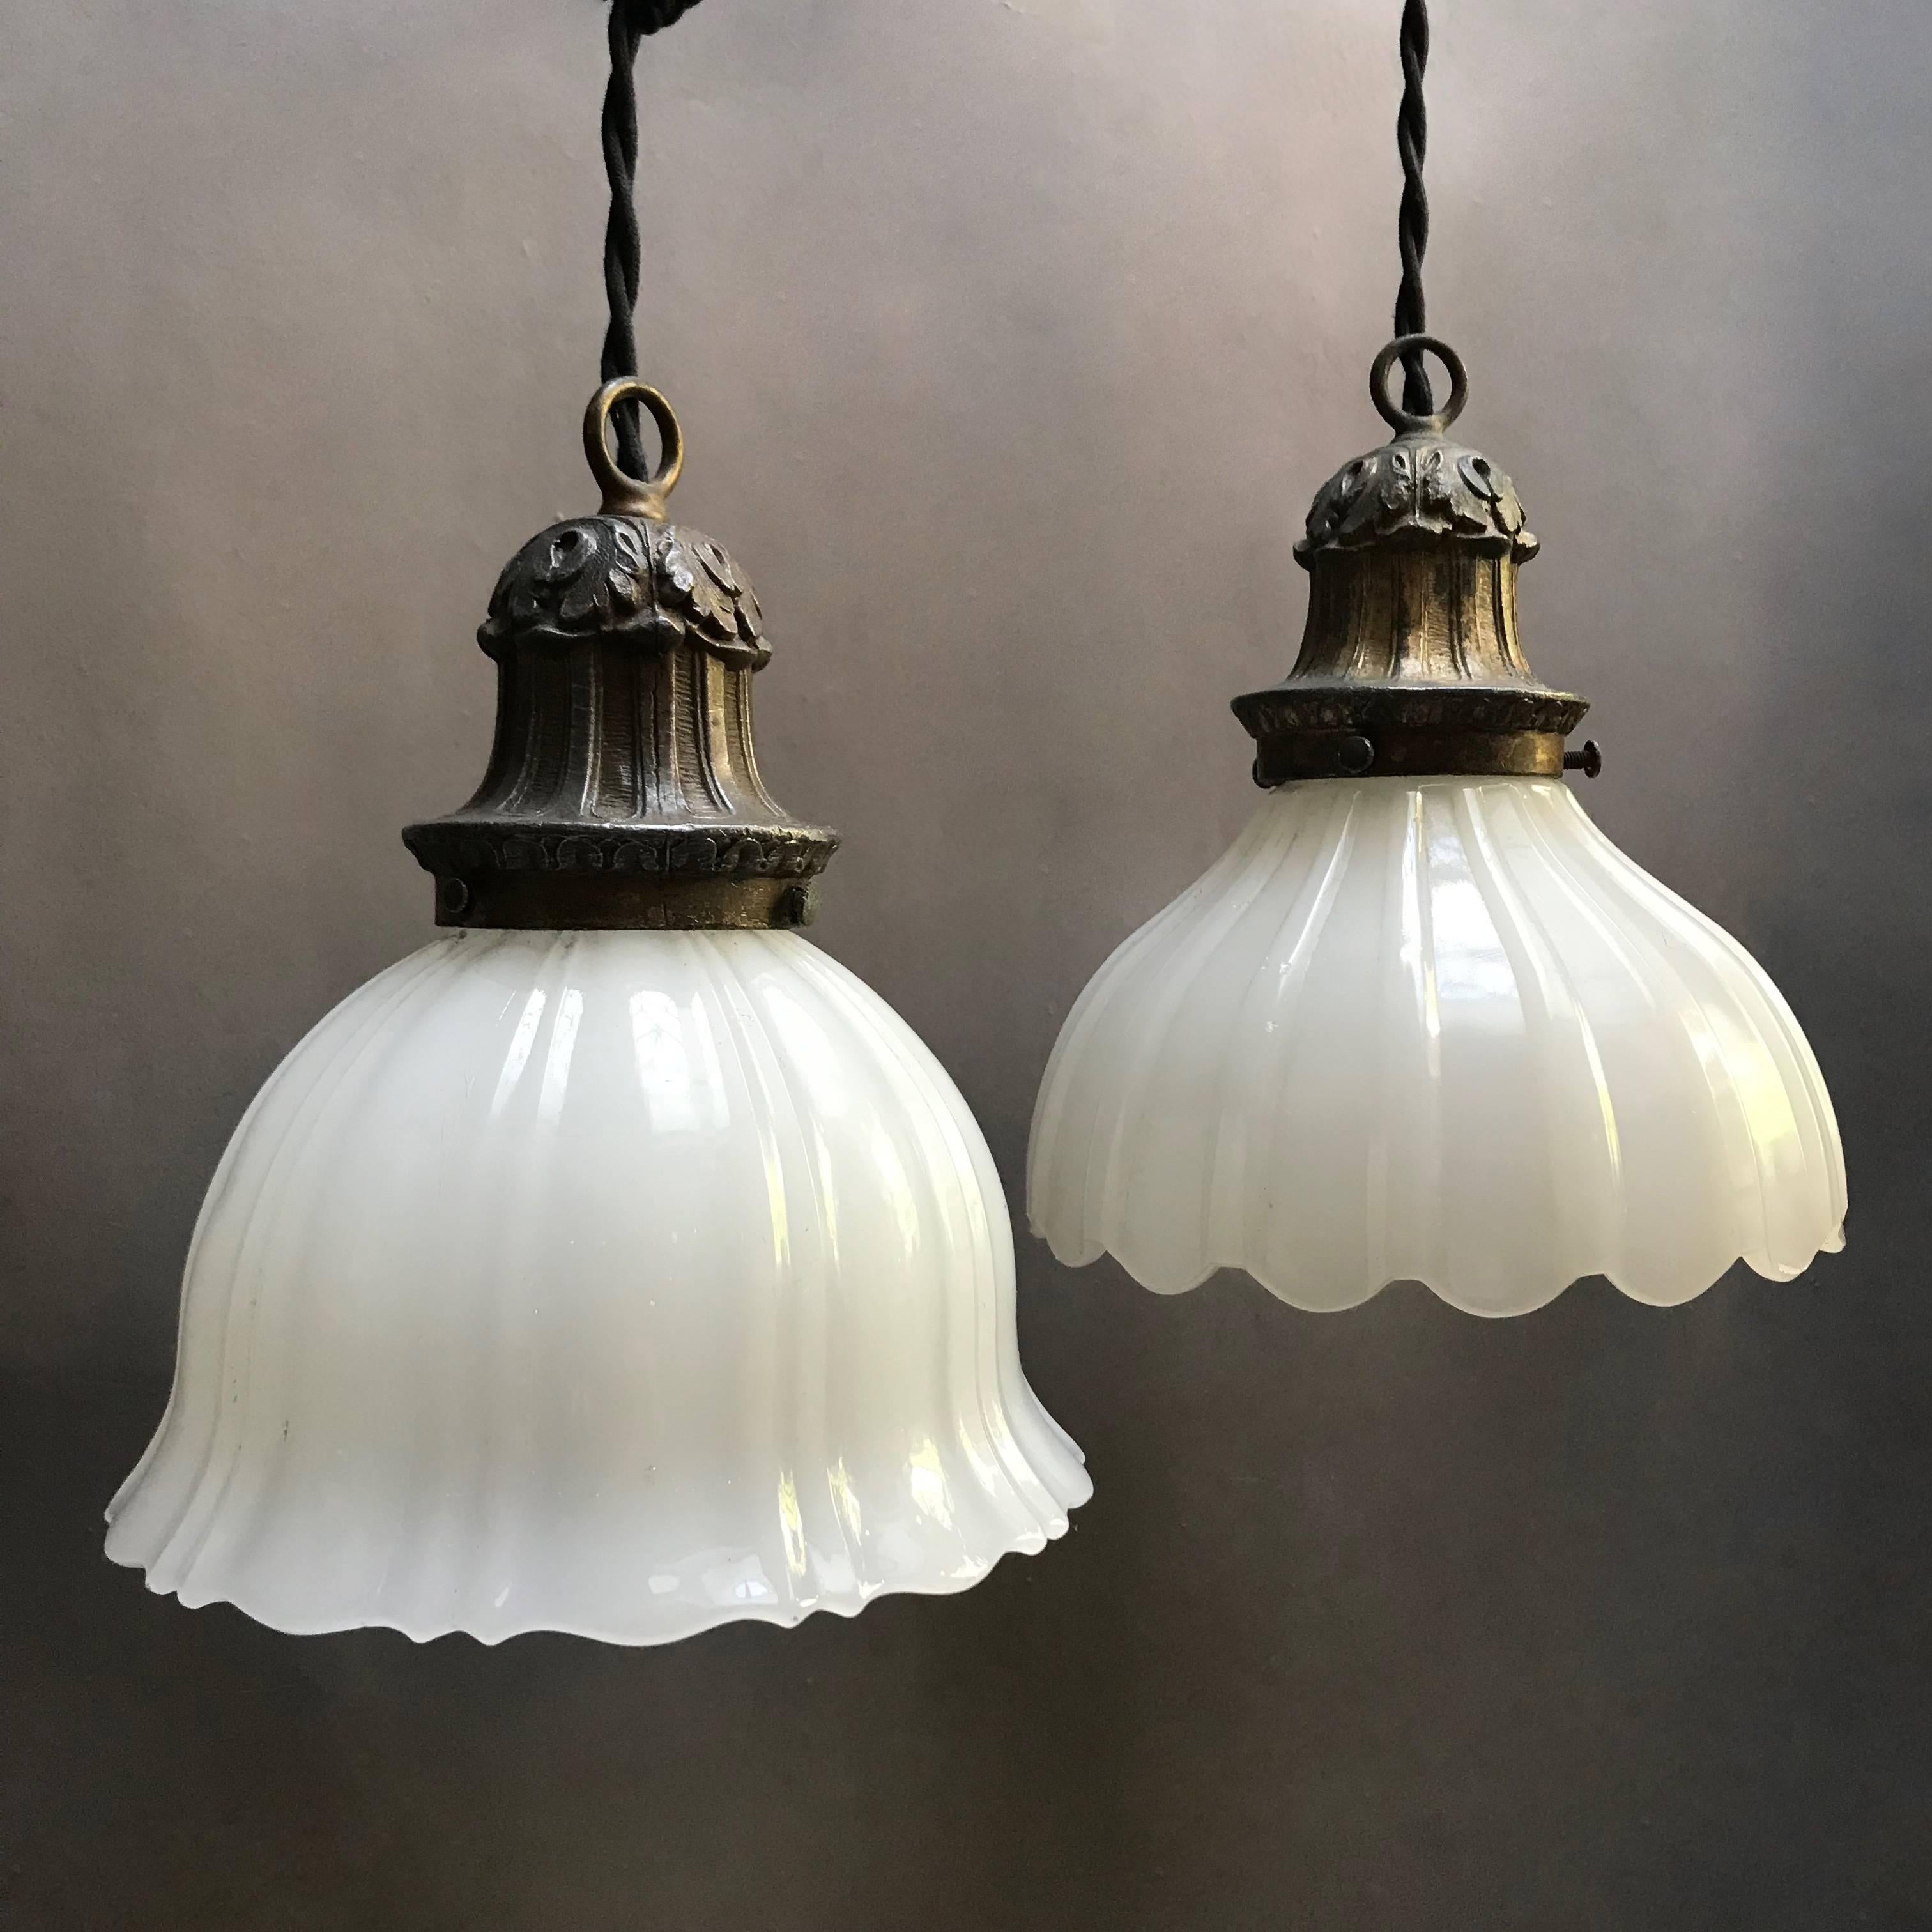 Antique pendant lights feature fluted and scalloped, thick milk glass shades with decorative brass fitters are newly wired with 50 inches of braided black cloth cord to accept 150 watt bulbs each. The shades vary so they are sold separately but they